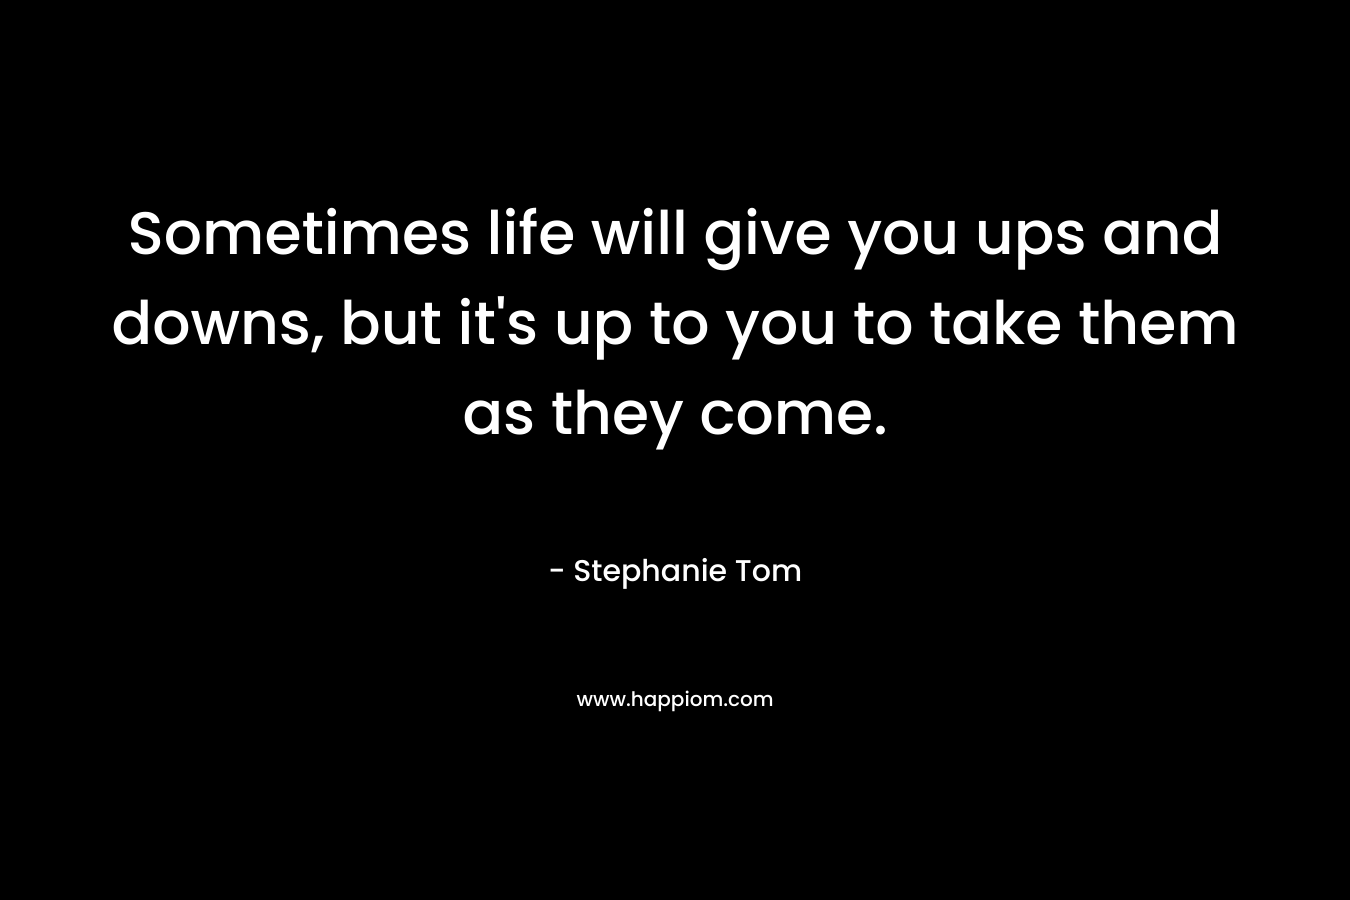 Sometimes life will give you ups and downs, but it's up to you to take them as they come.